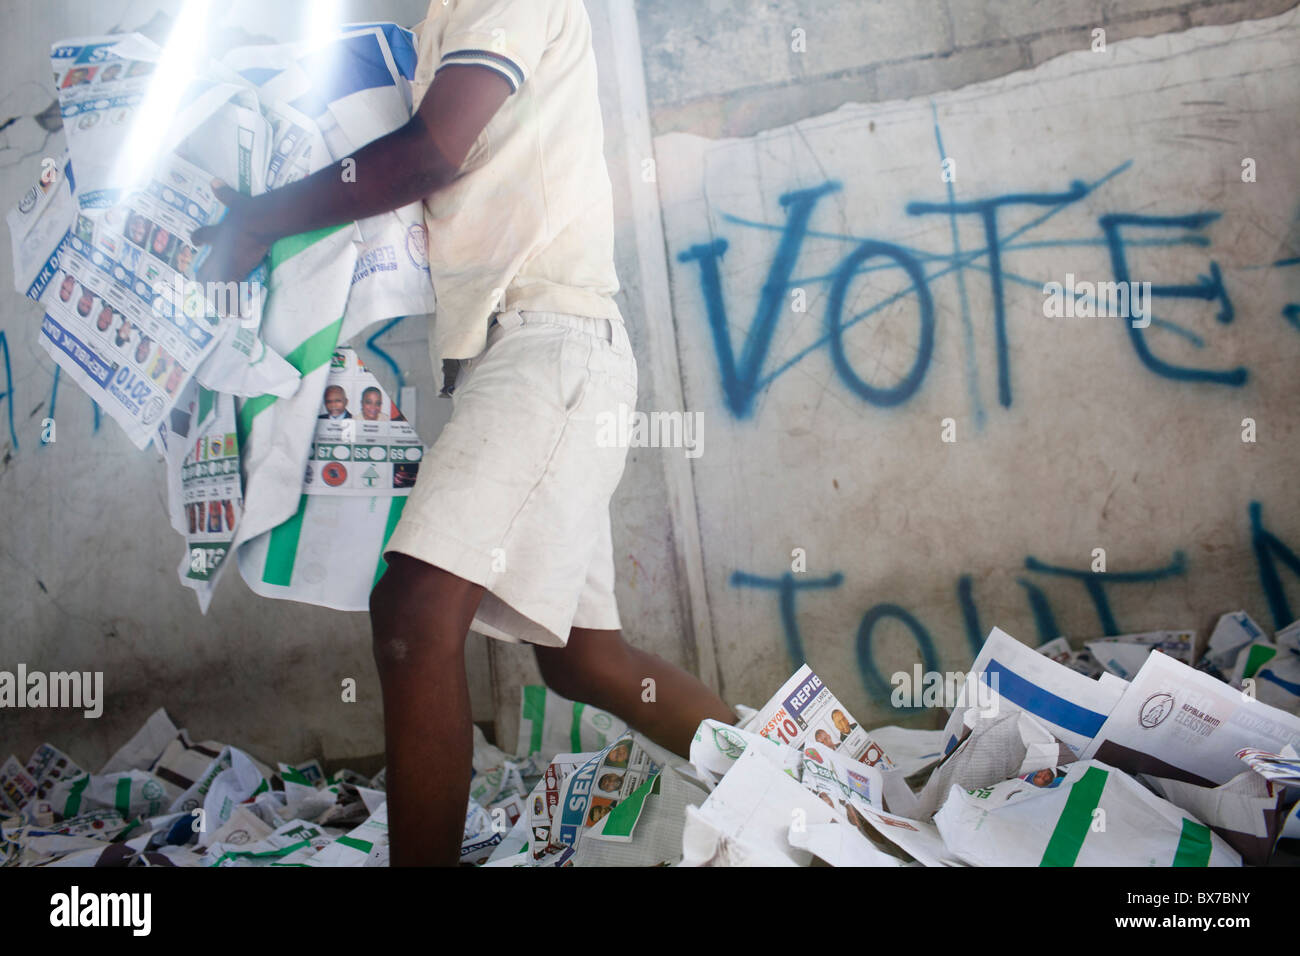 Children play in ballots at a polling station that had been ransacked on the previous day during presidential elections Stock Photo